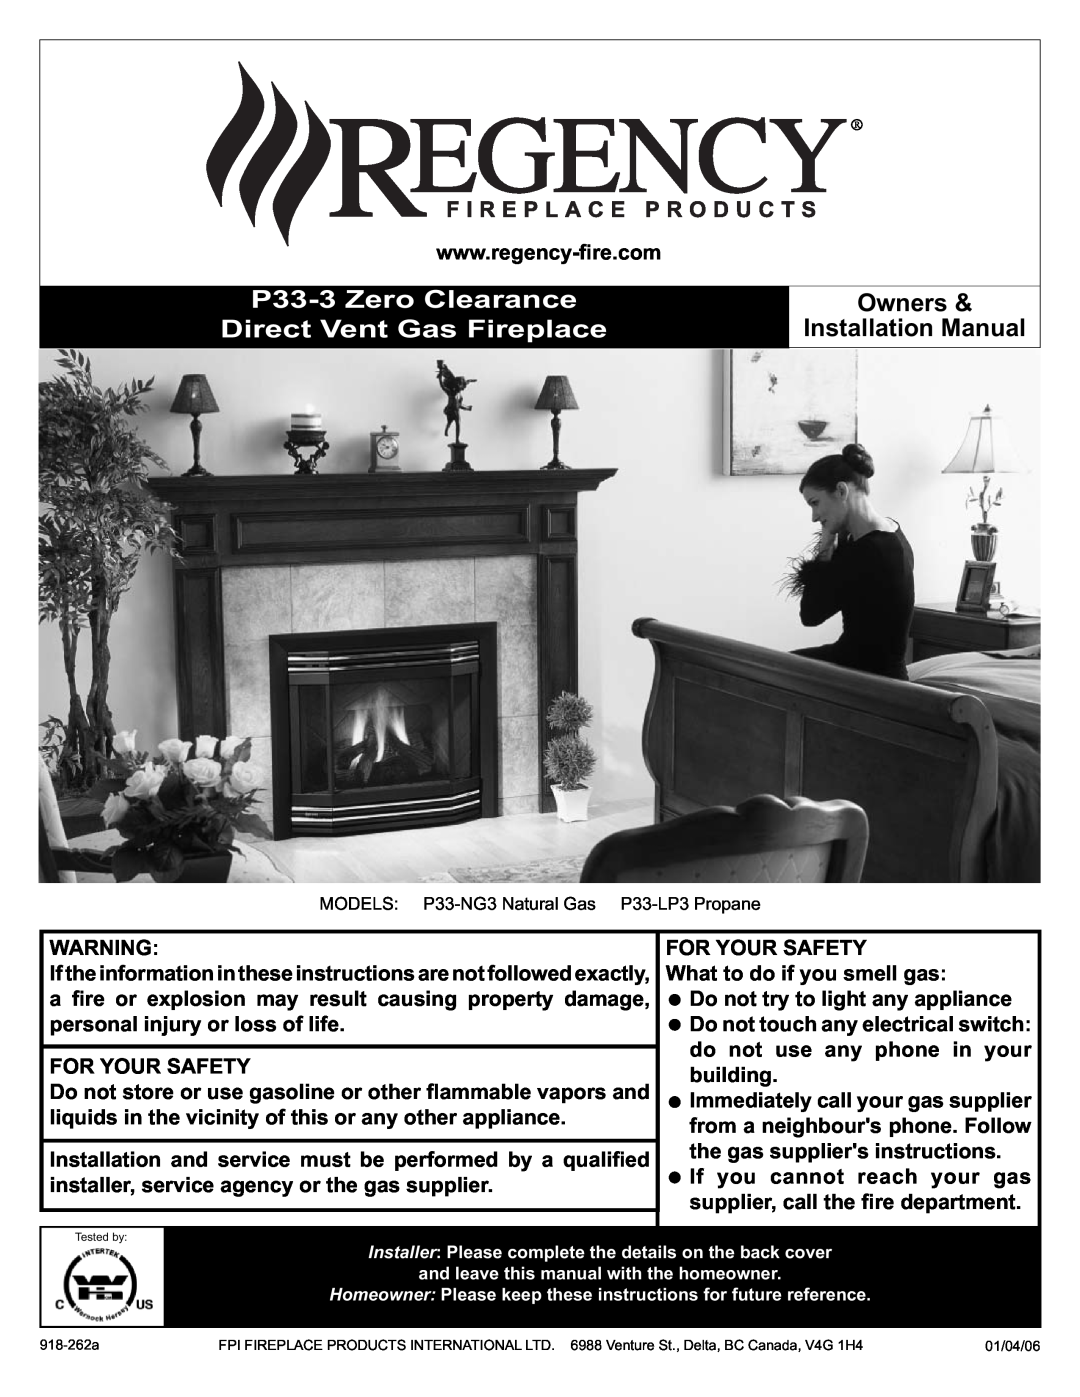 Regency P33-NG3, P33-LP3 installation manual P33-3Zero Clearance, Direct Vent Gas Fireplace, Owners, Installation Manual 